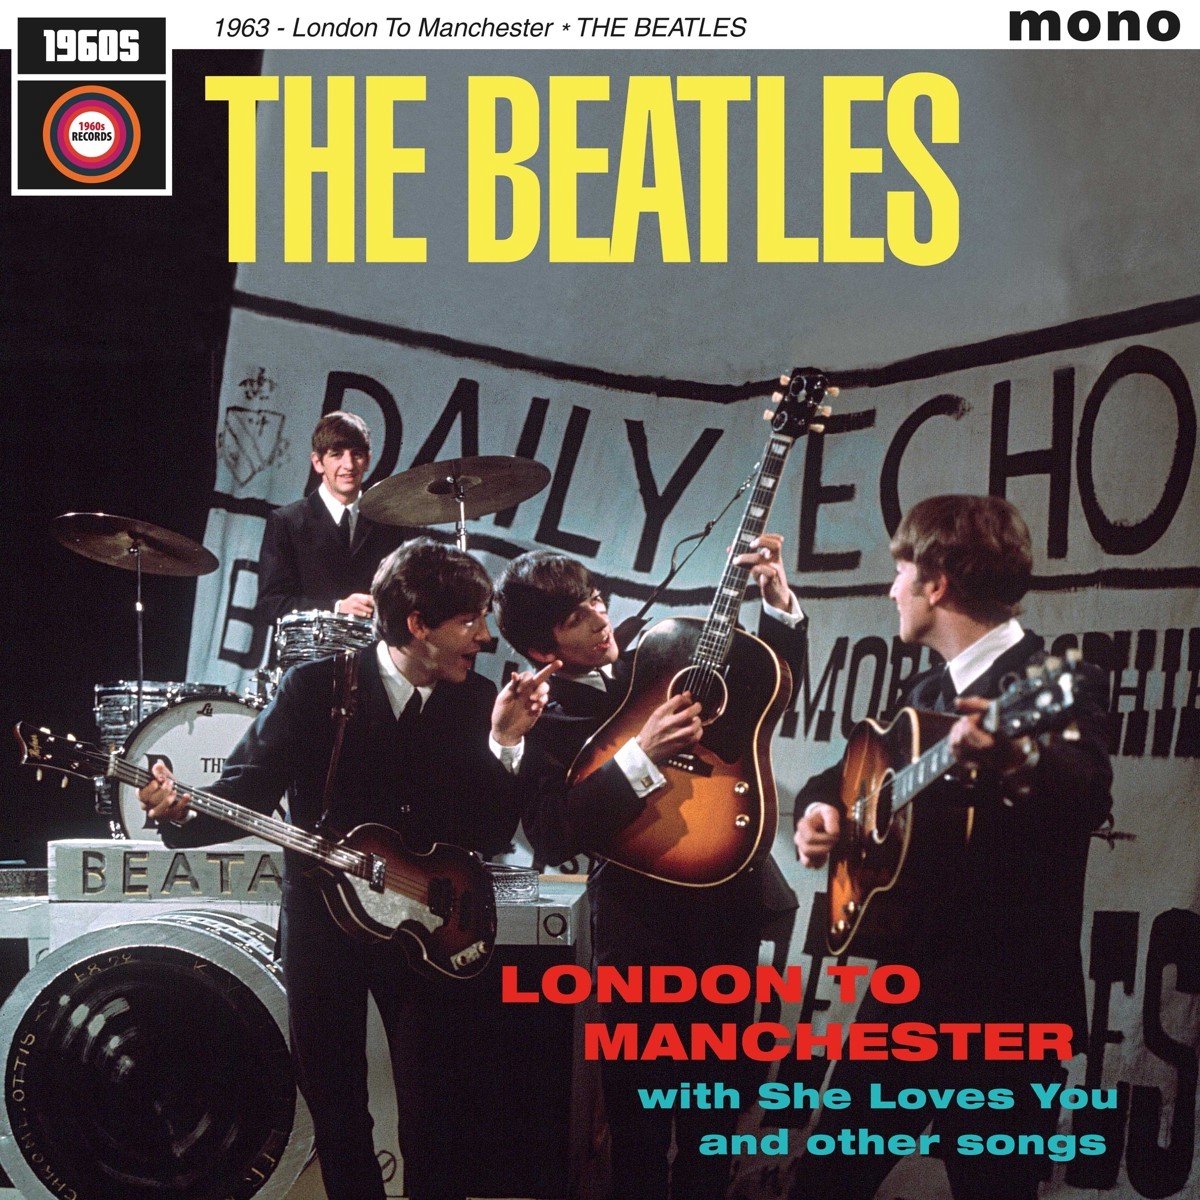 The Beatles - 1963: London To Manchester (LP) - The Beatles